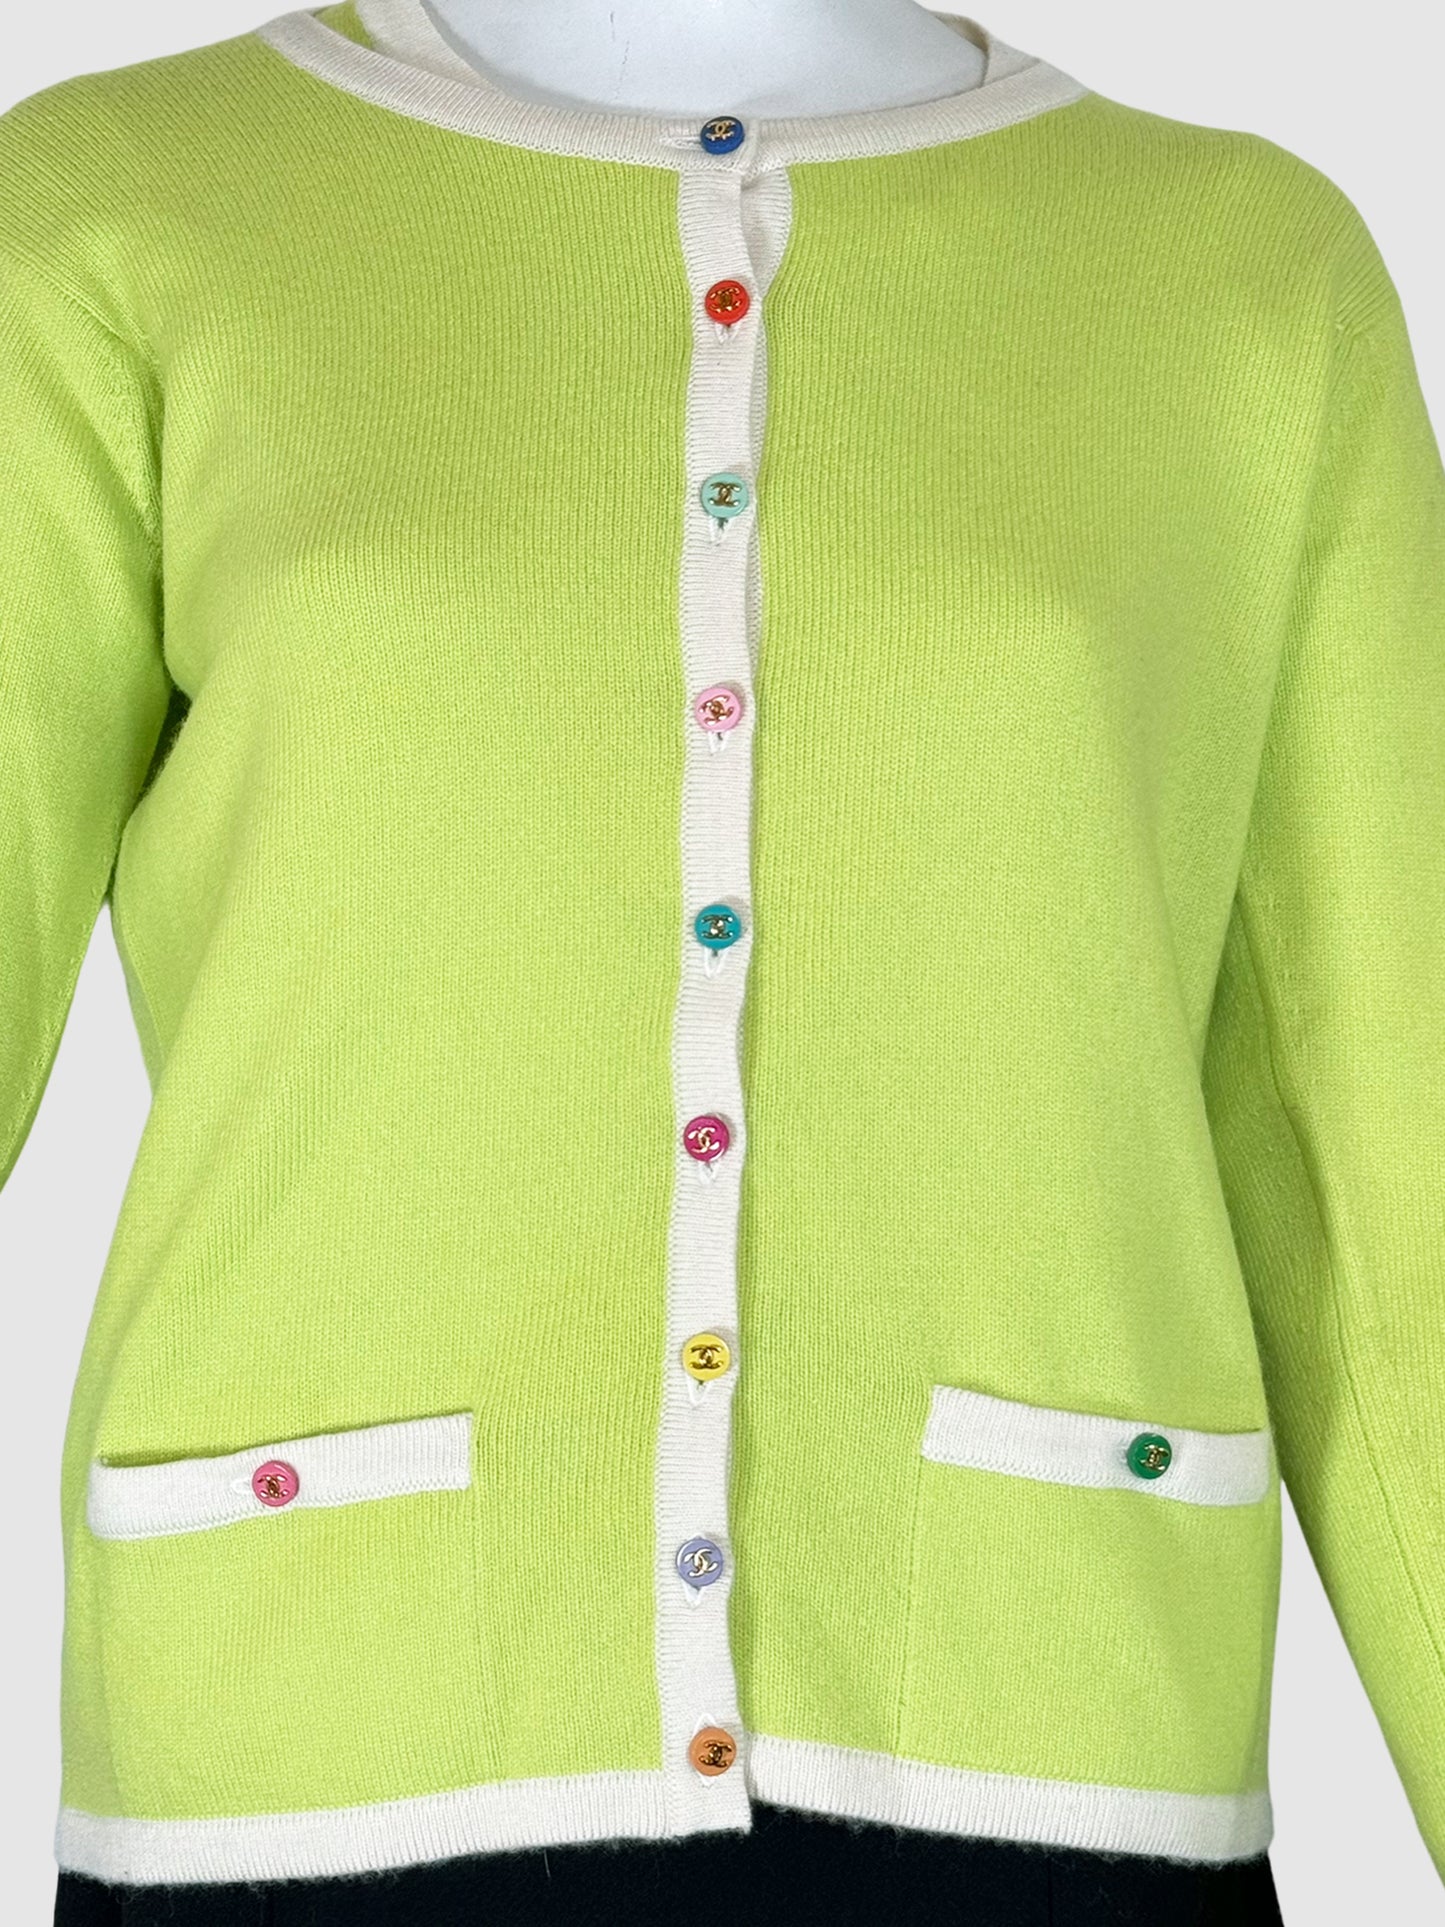 Chanel Cashmere Shirt and Cardigan 2-Piece Set - Size 42